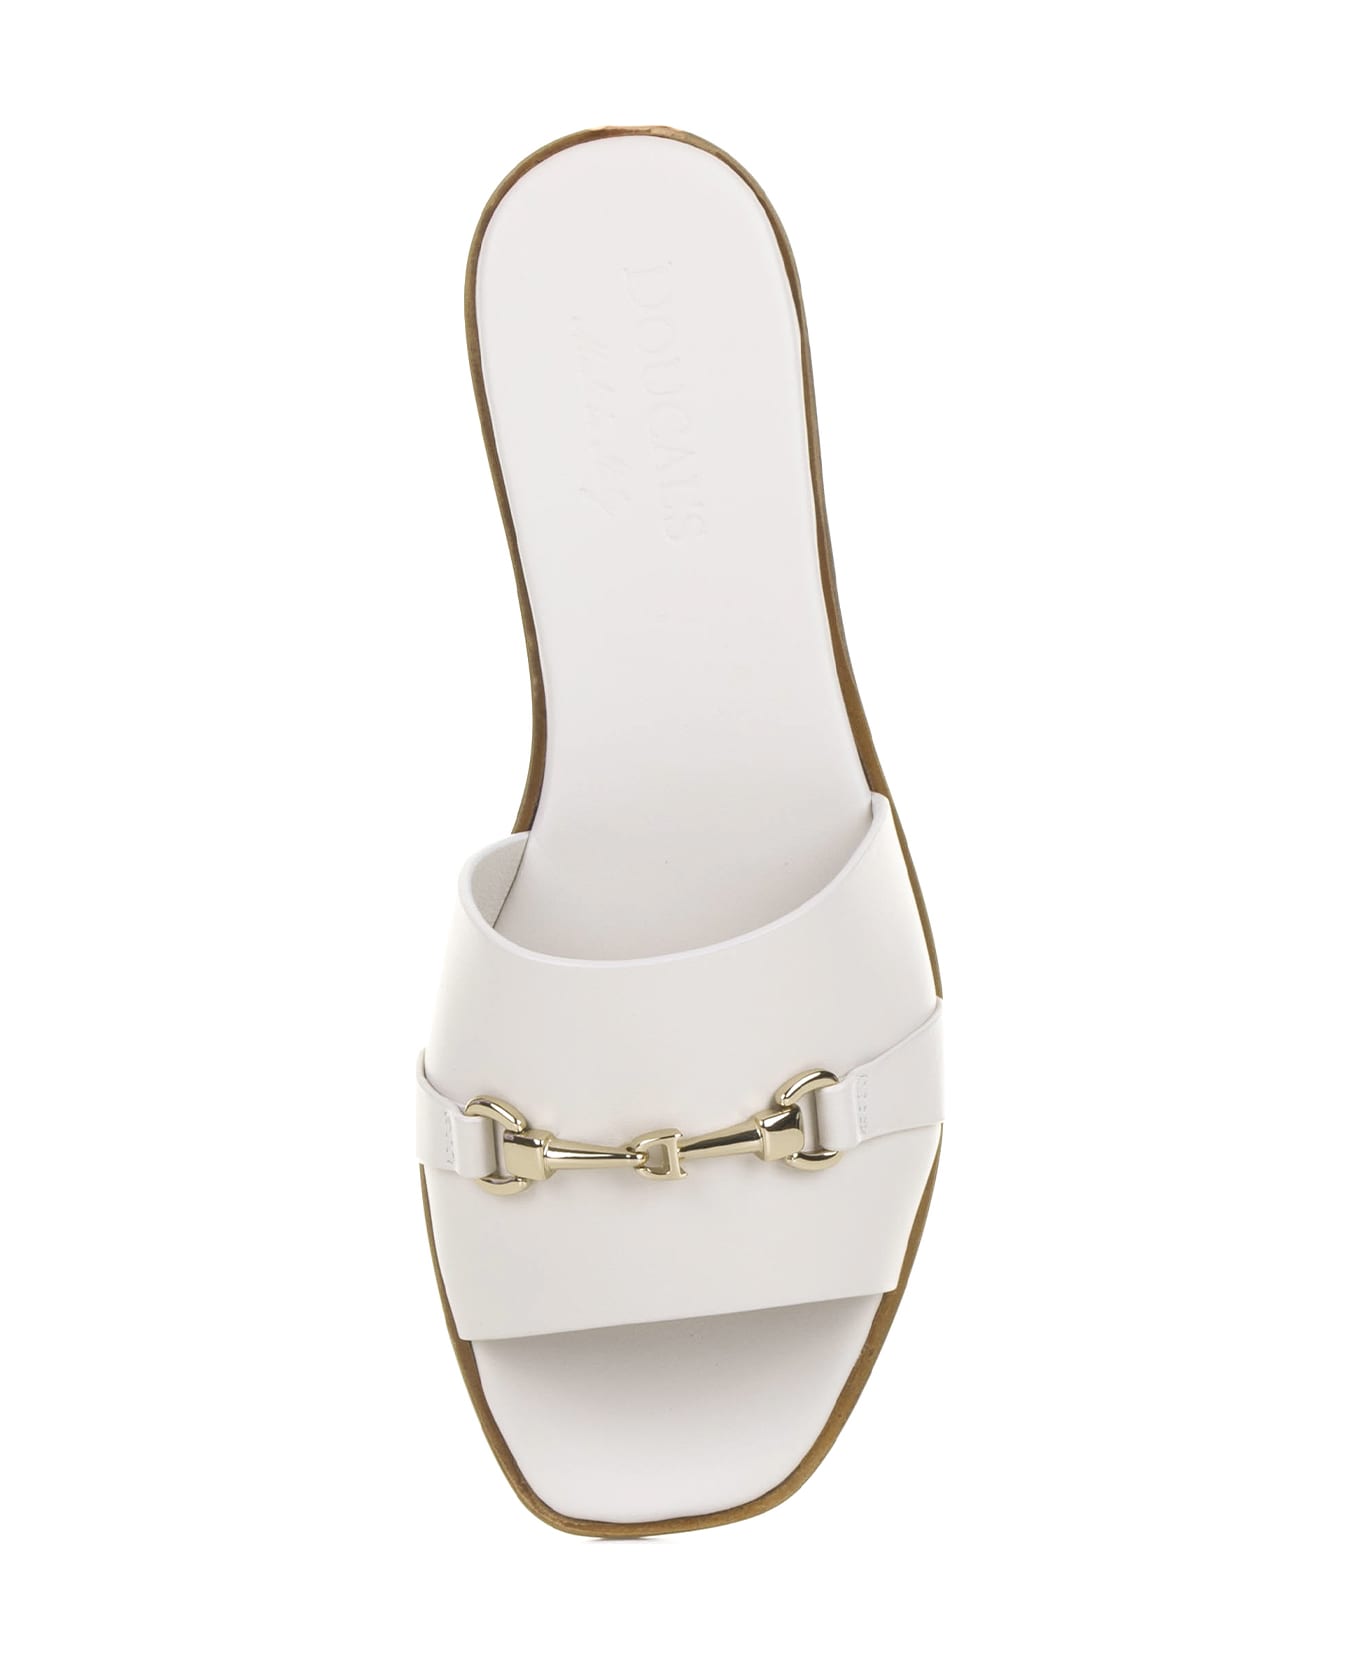 Doucal's White Leather Slipper With Horsebit - GESSO